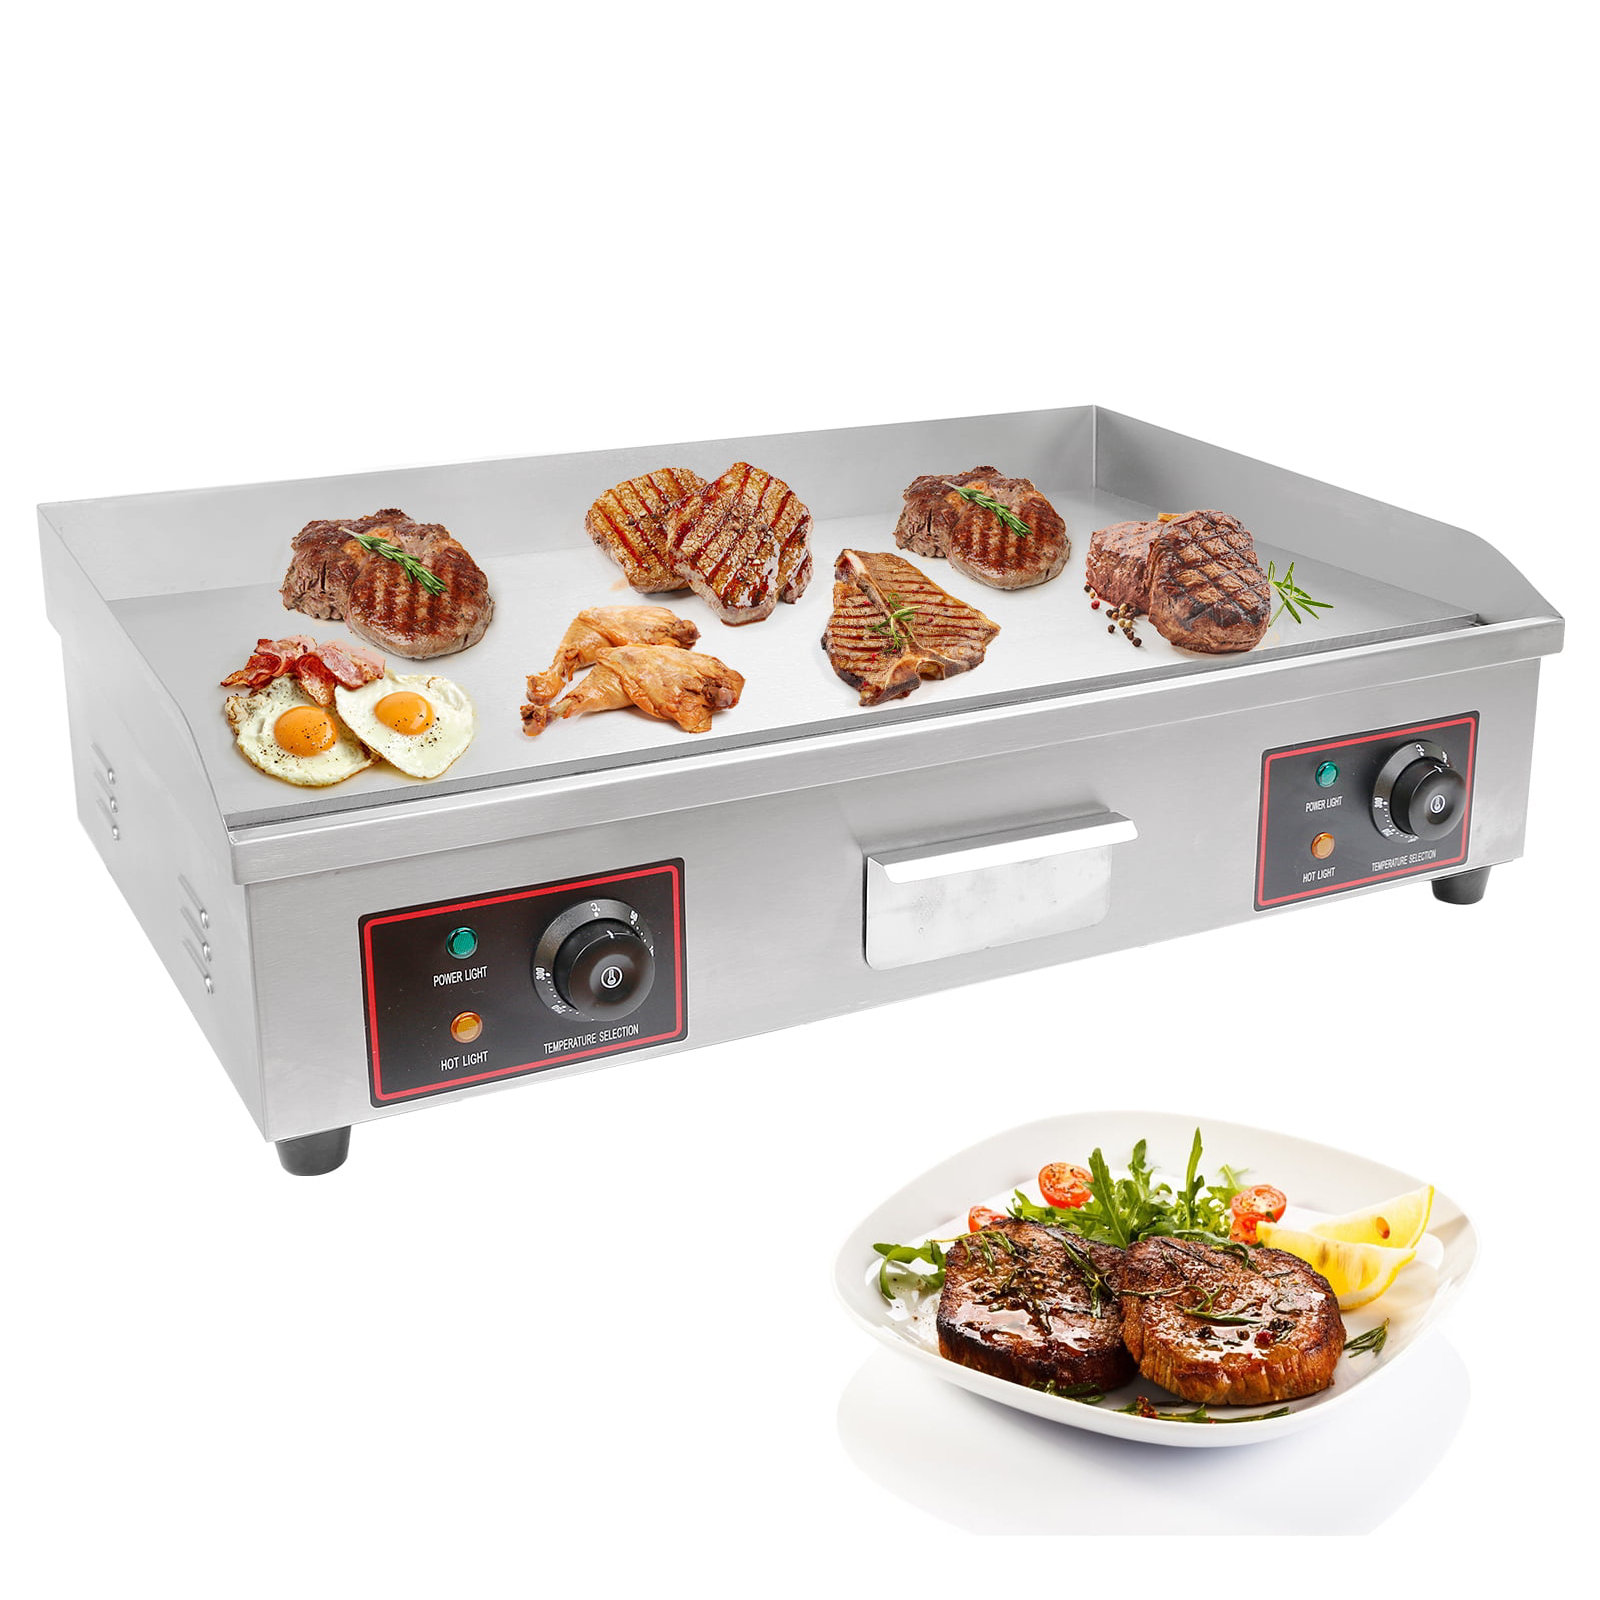 WeChef 2500W 24 Electric Countertop Griddle Flat Top Commercial Restaurant  BBQ Grill